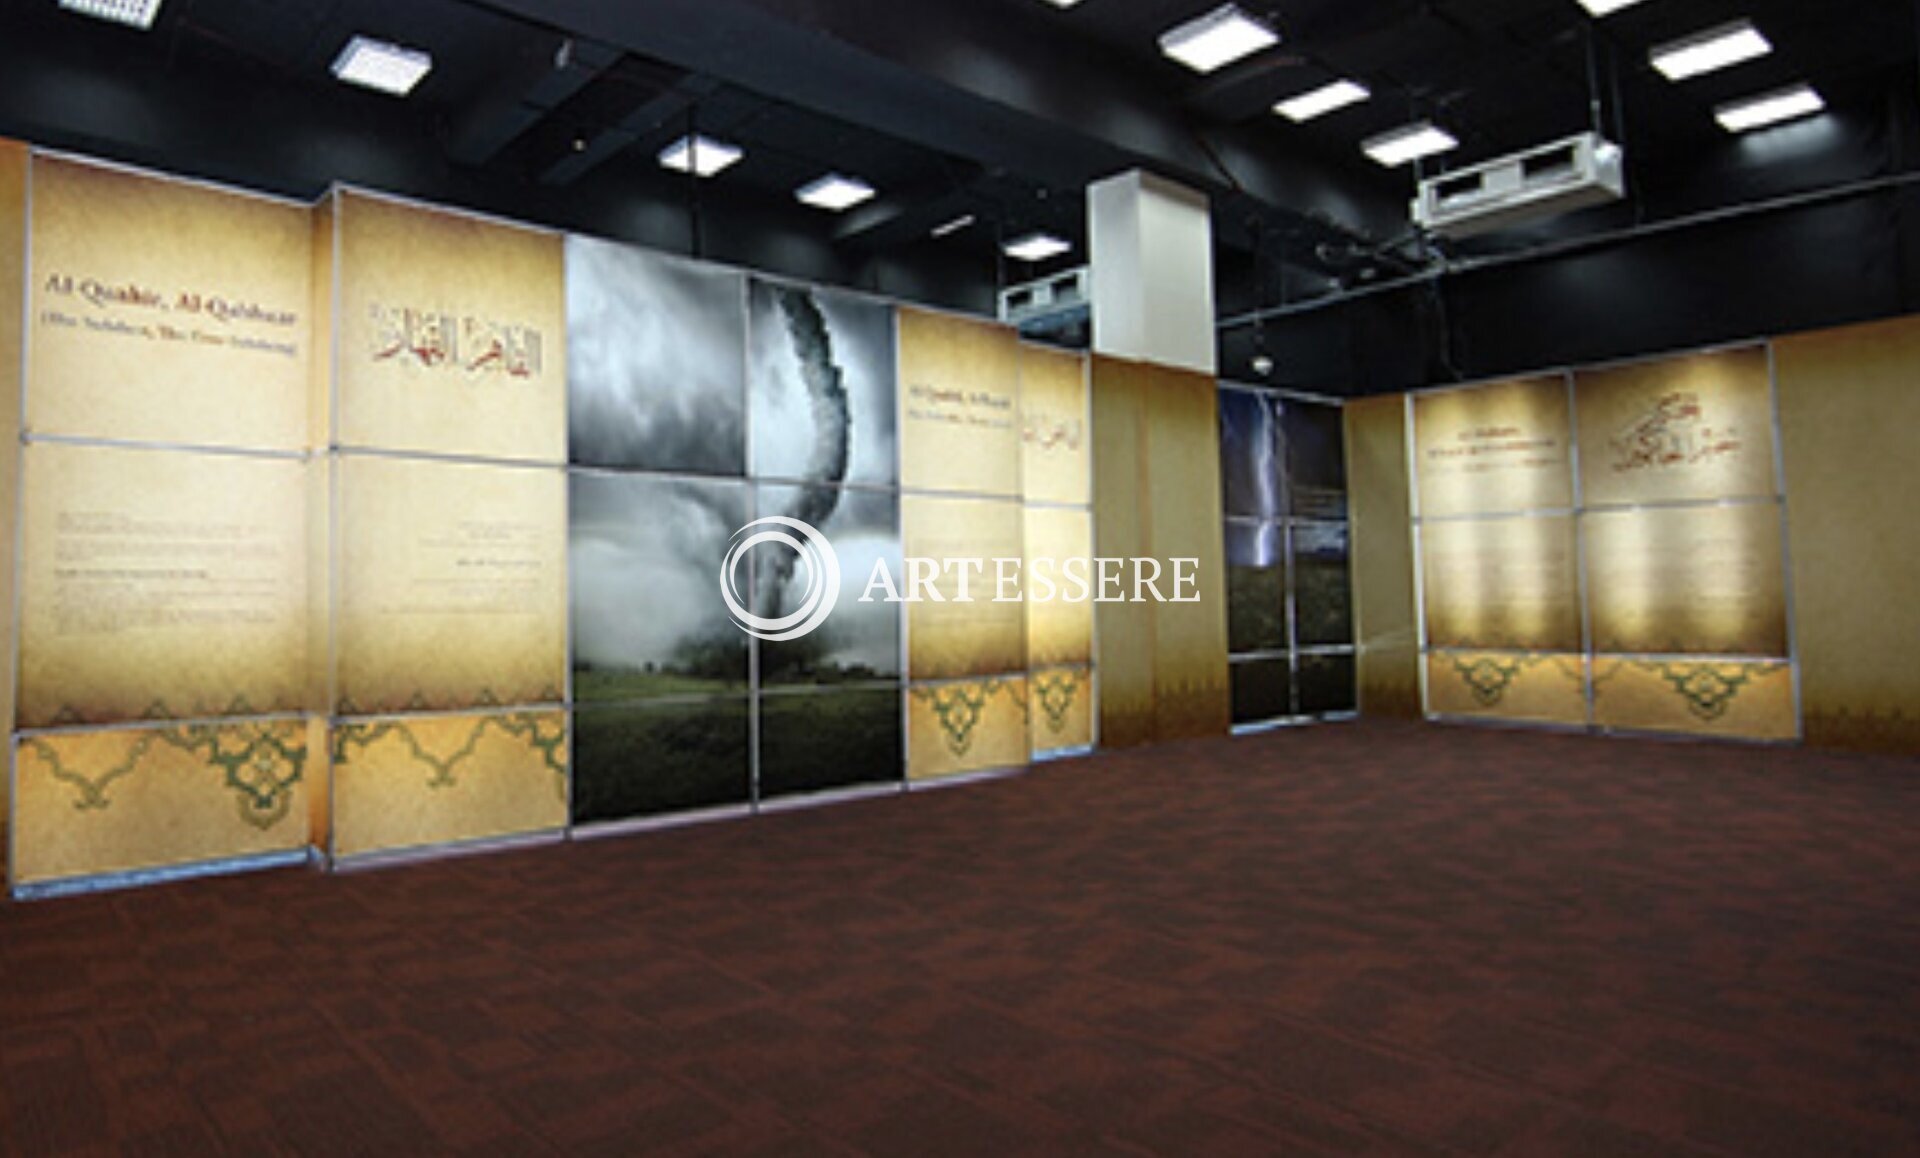 The Beautiful Names of Allah Exhibition